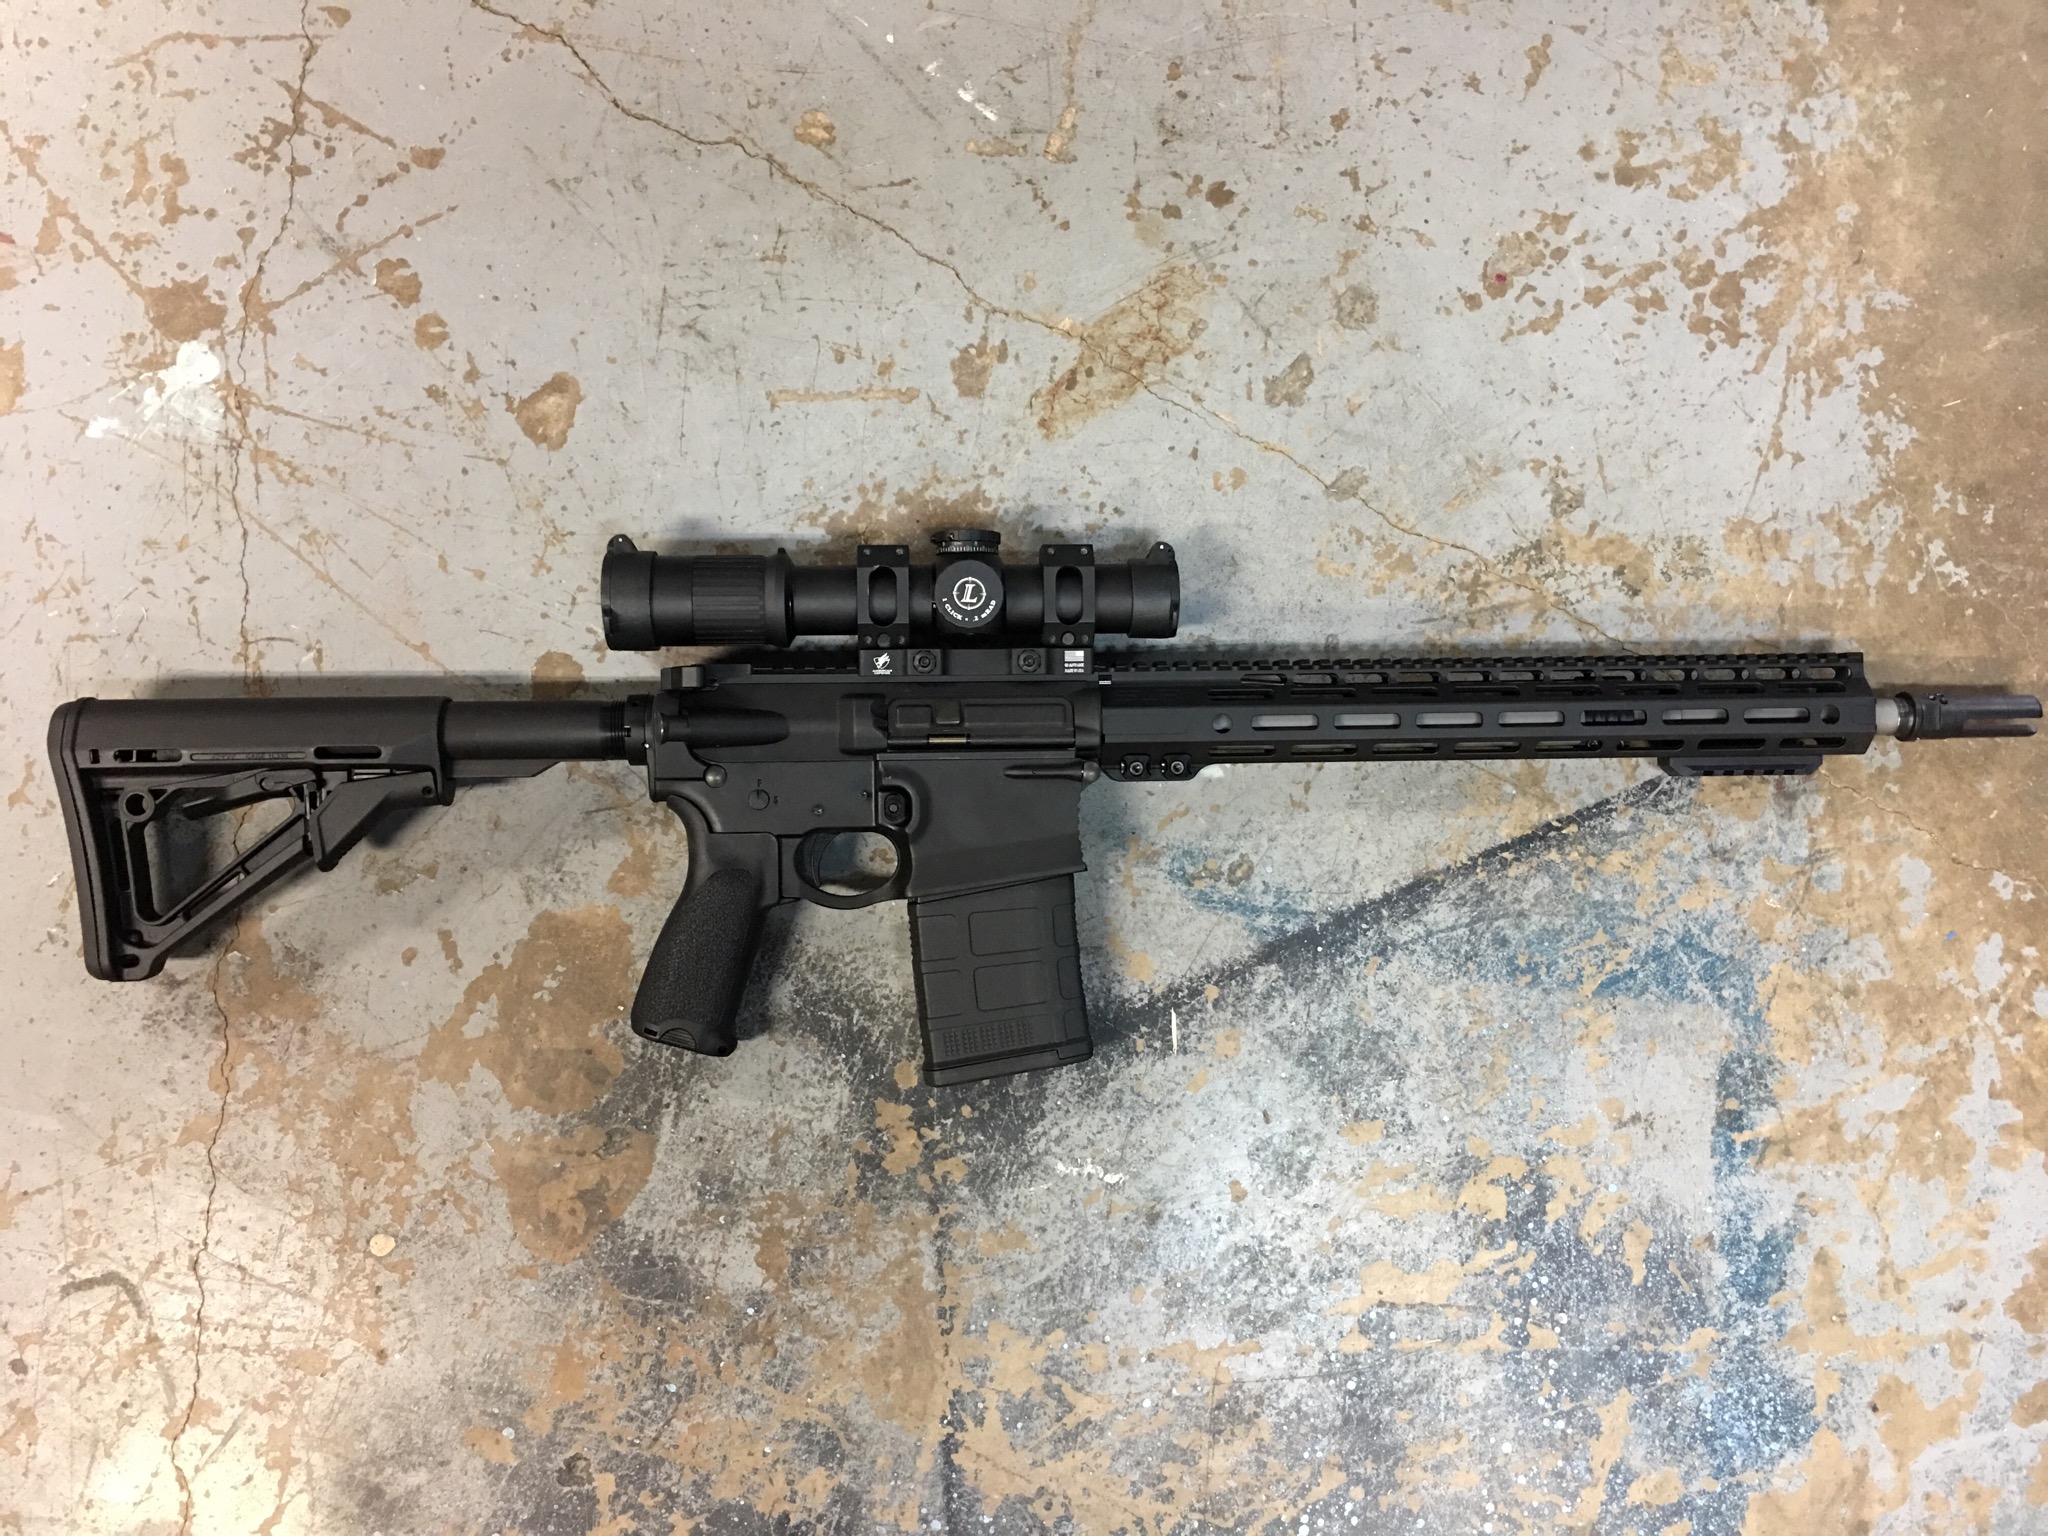 Newest build just came back with a fresh cerakote paint job : r/AR10